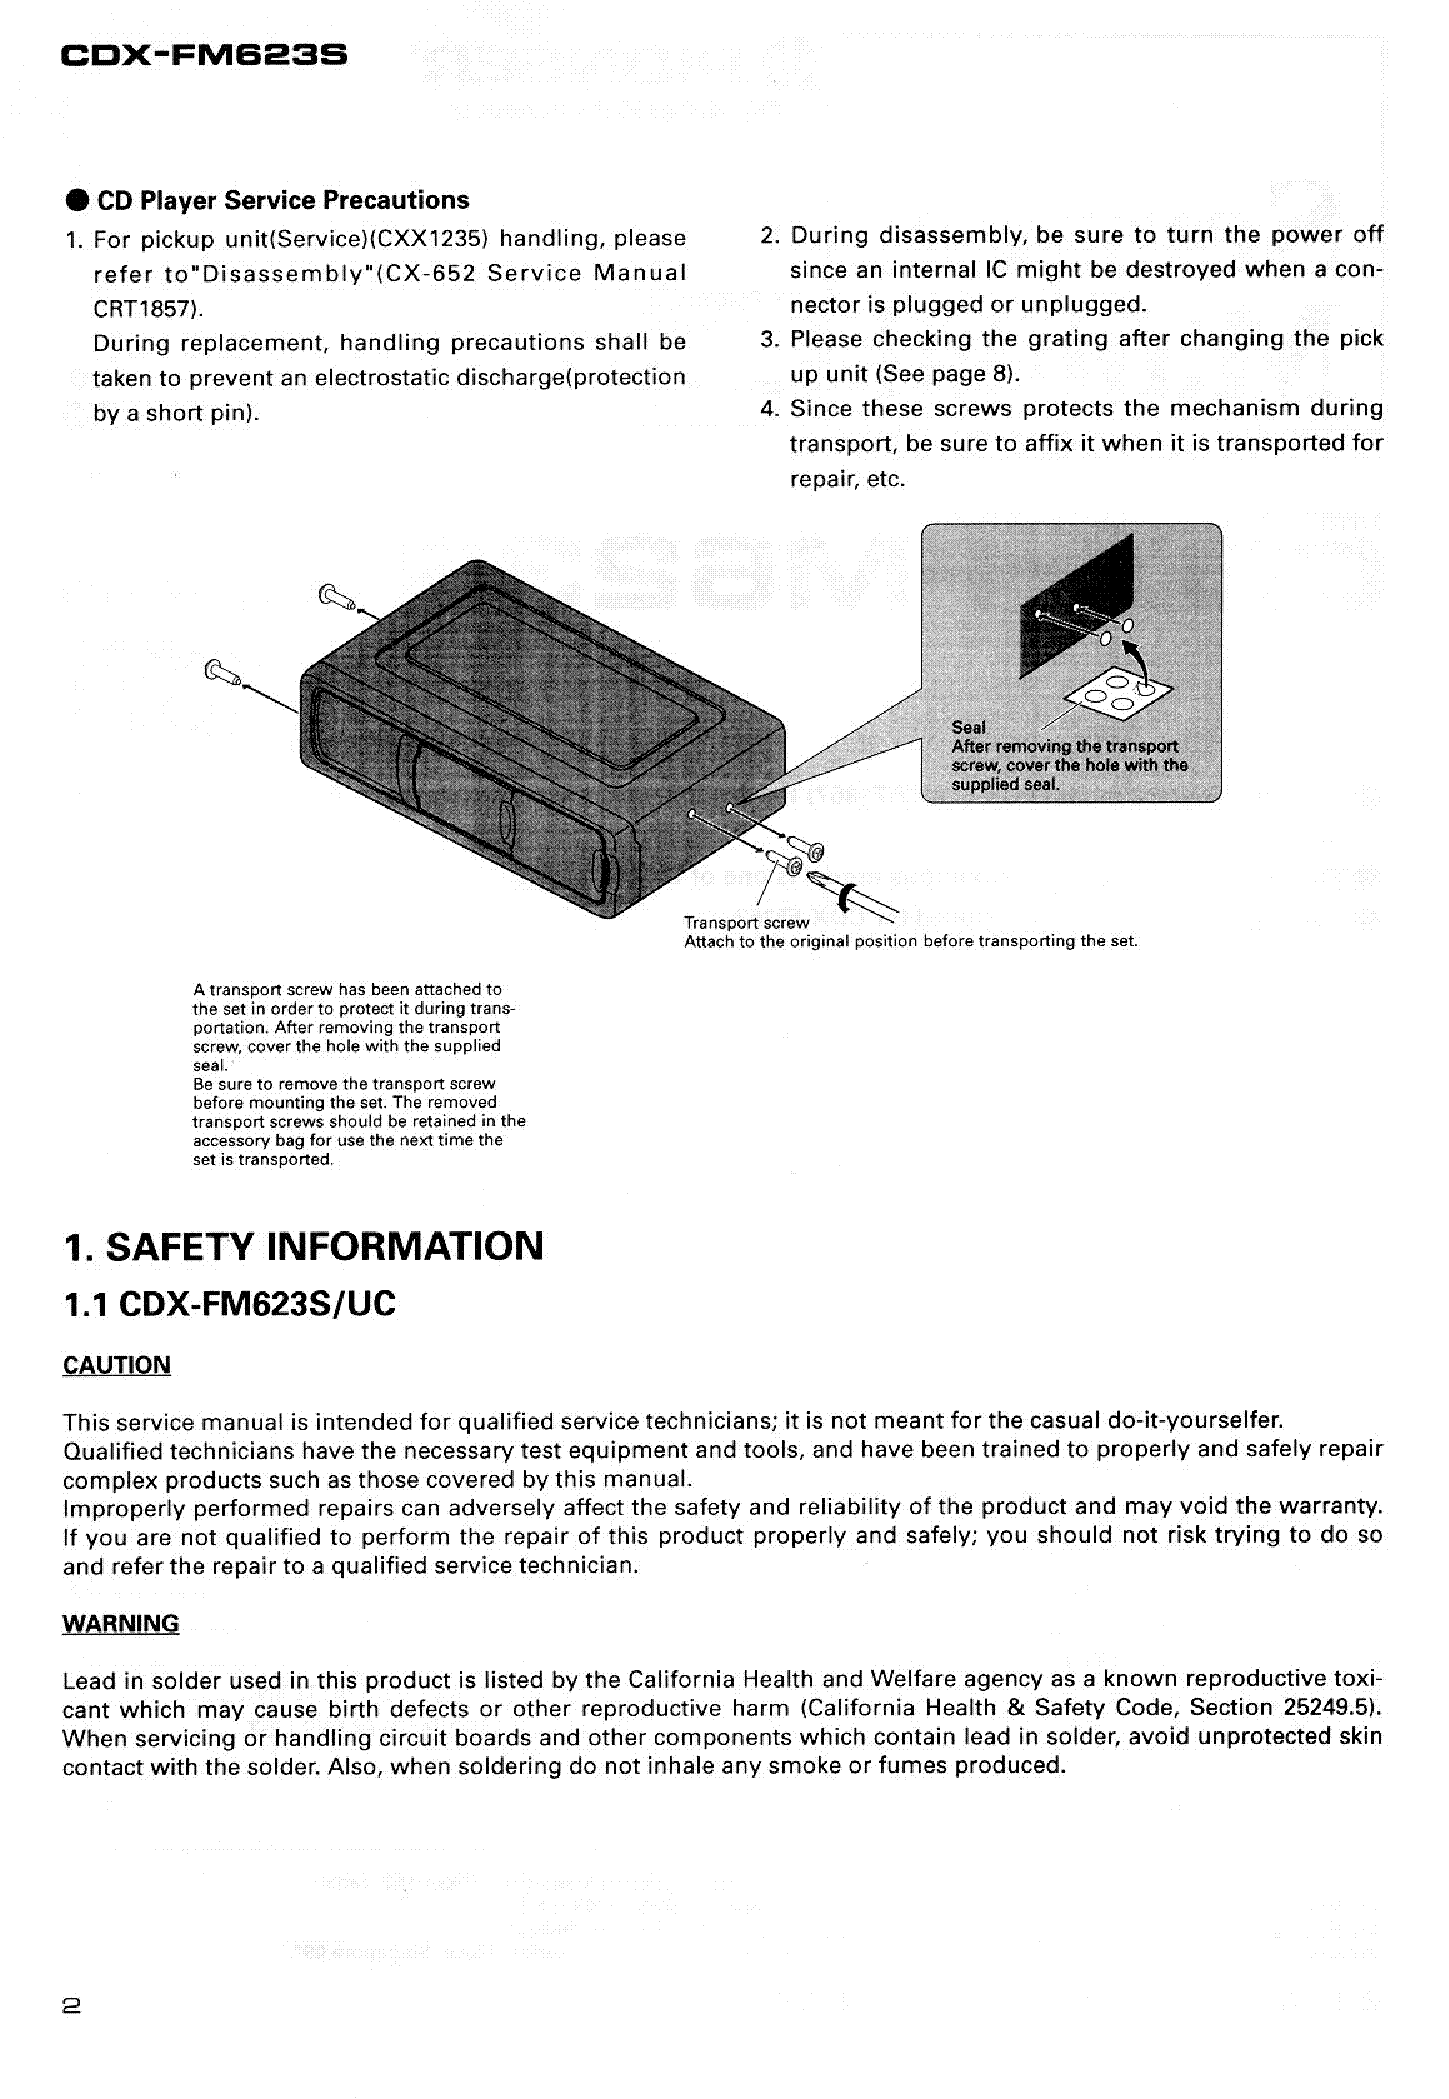 PIONEER CDX-FM-623-S service manual (2nd page)